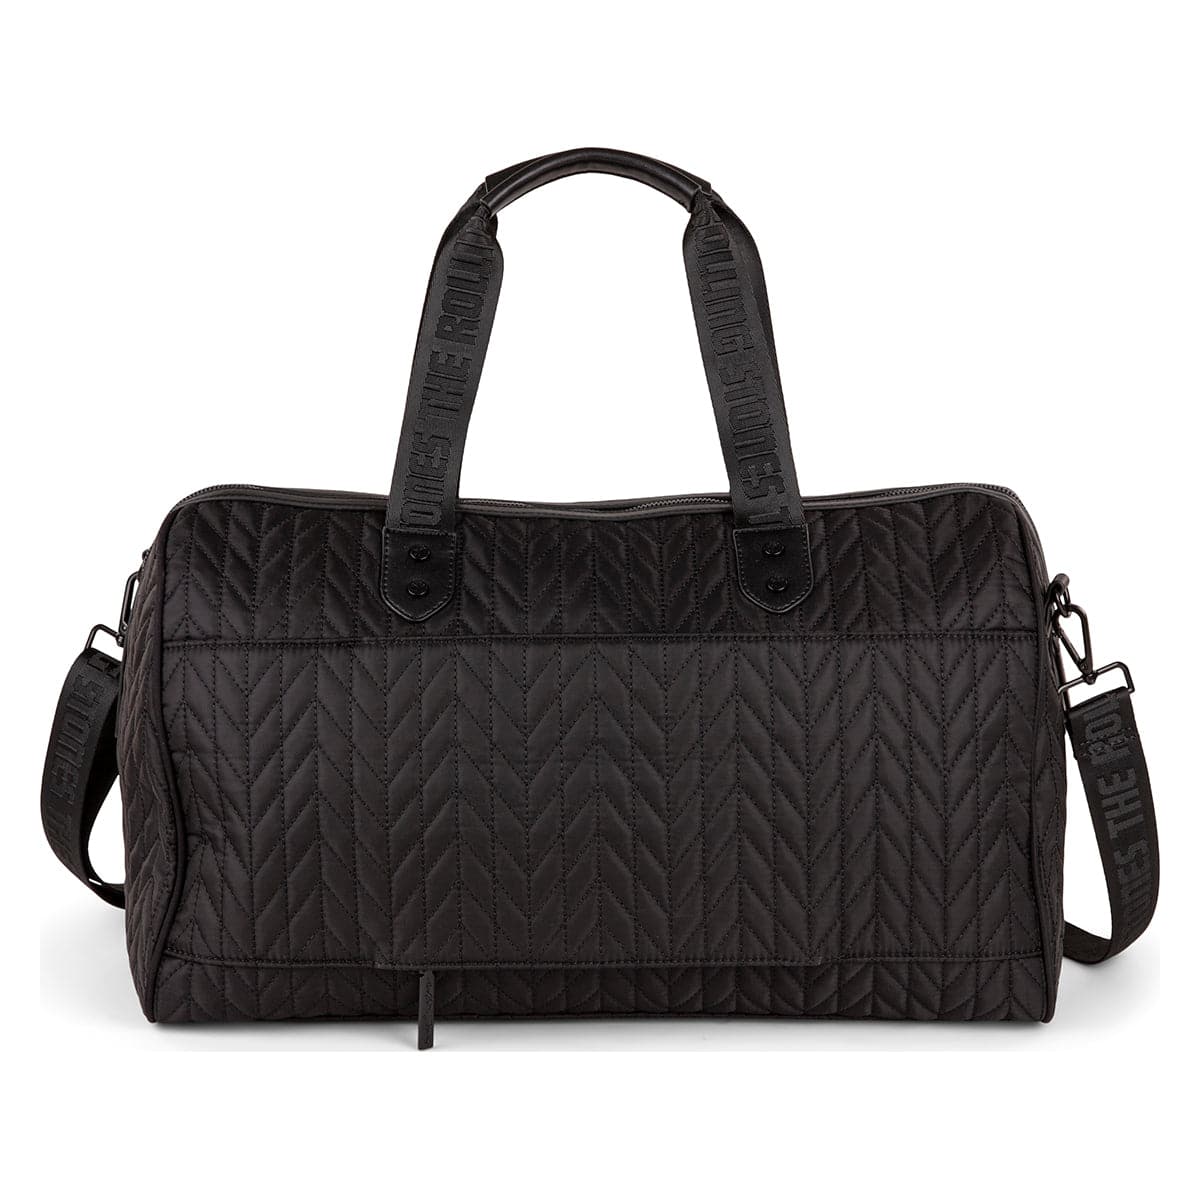 The Rolling Stones Iconic Quilted Duffle Bag